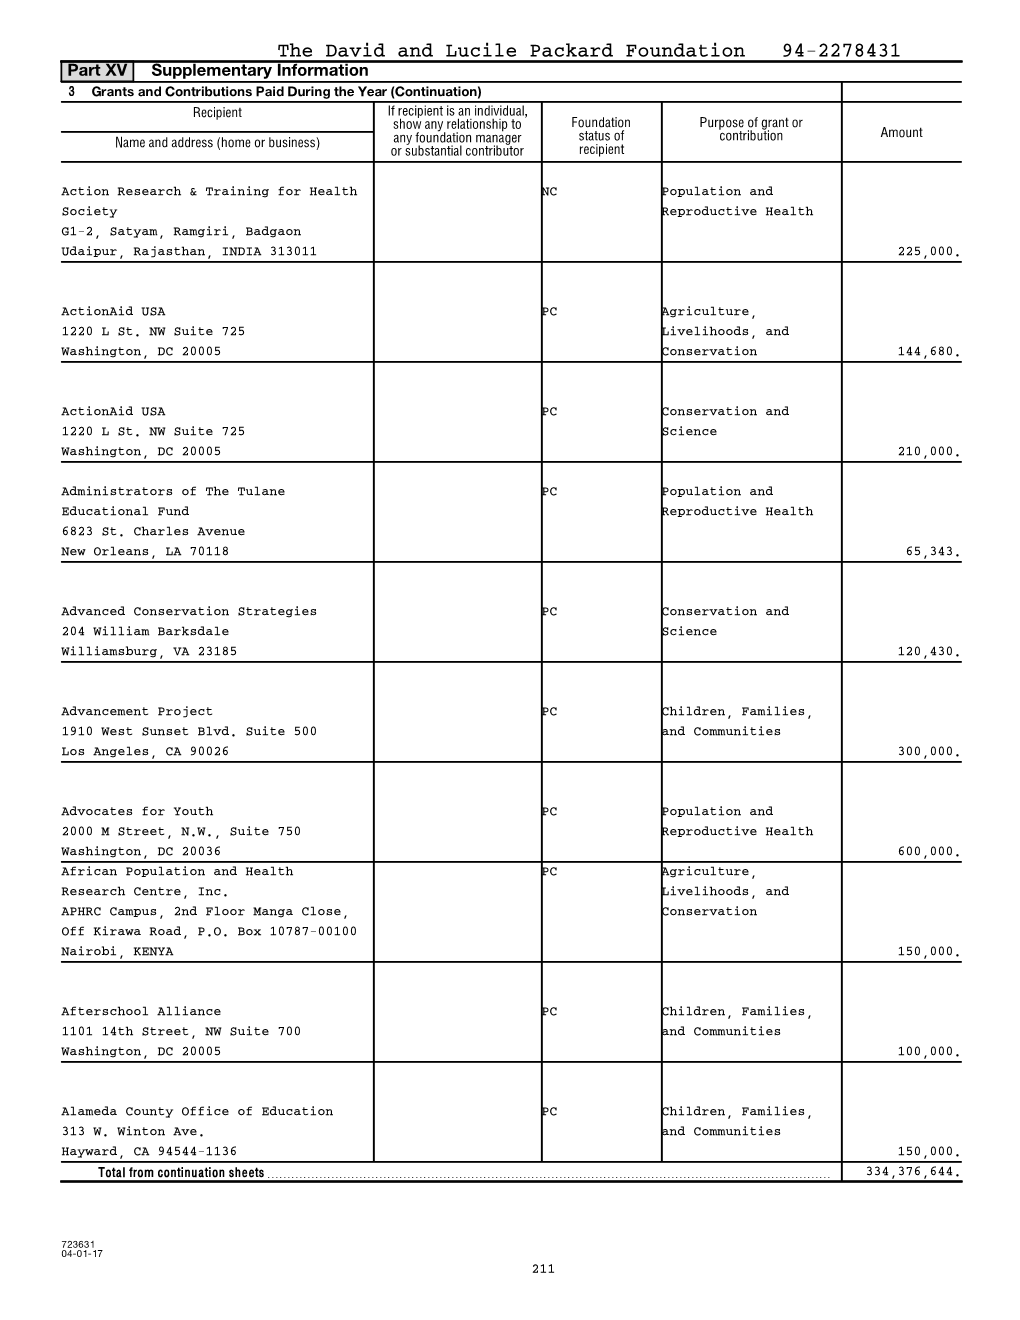 Part XV Line 3A Grants and Contributions